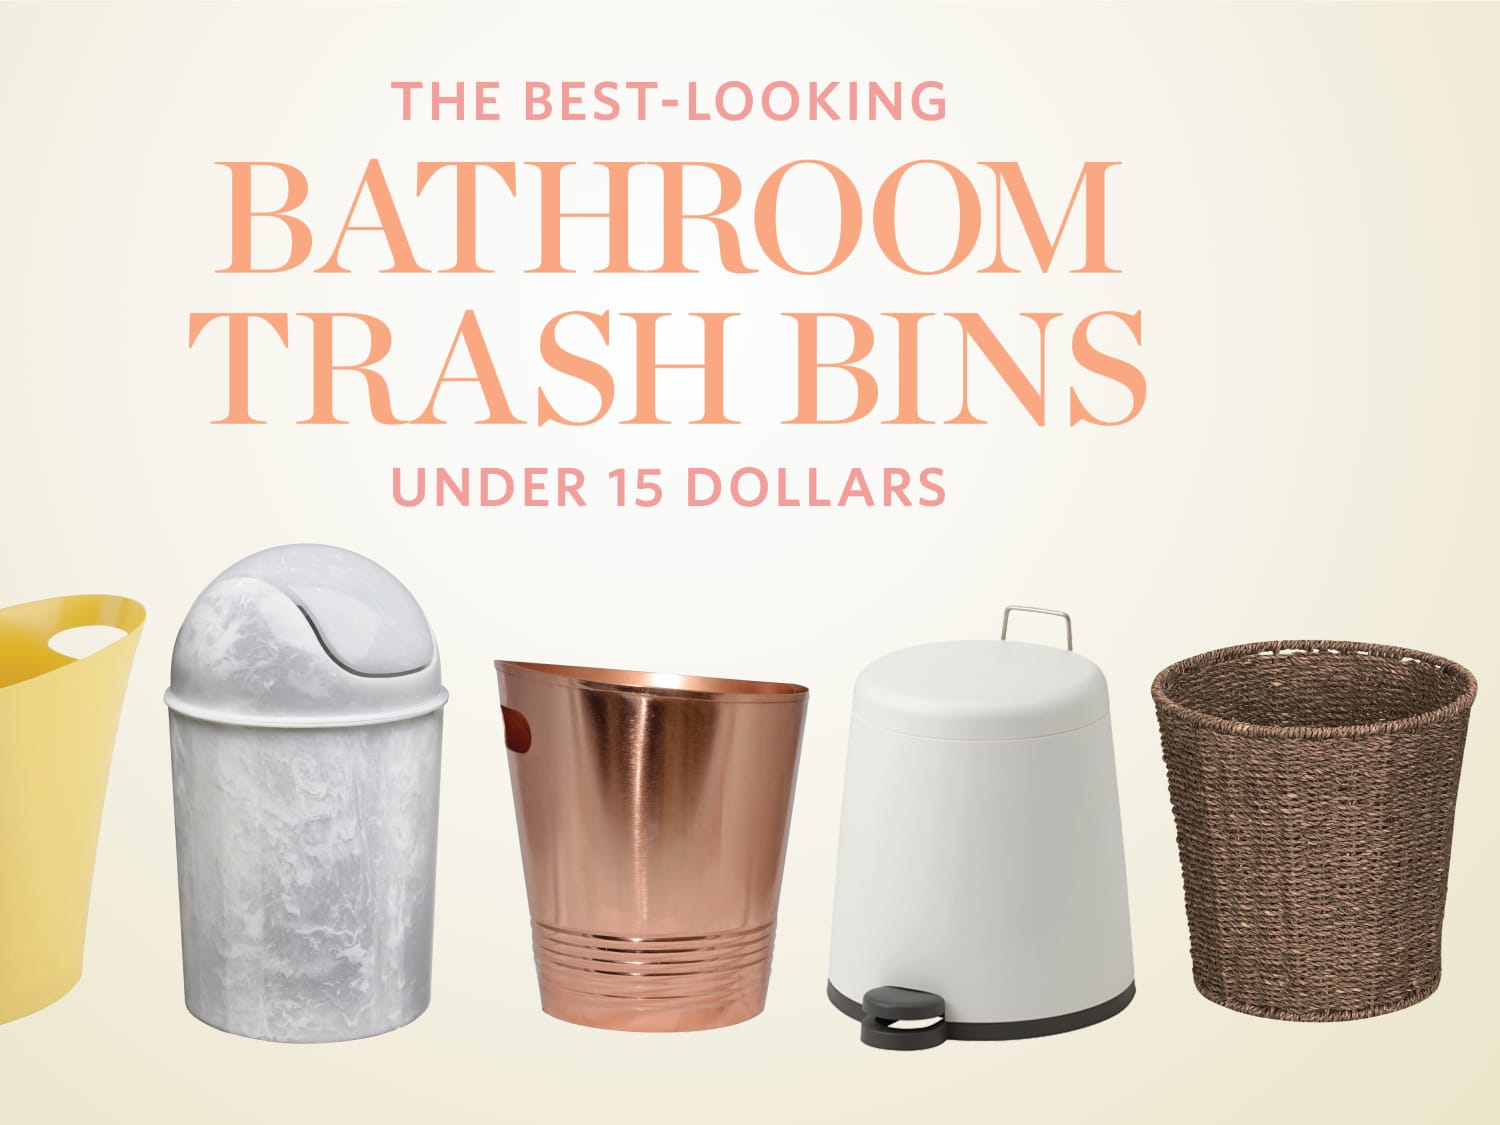 Stylish Small Bathroom Trash Cans for $15 or Less | Apartment Therapy